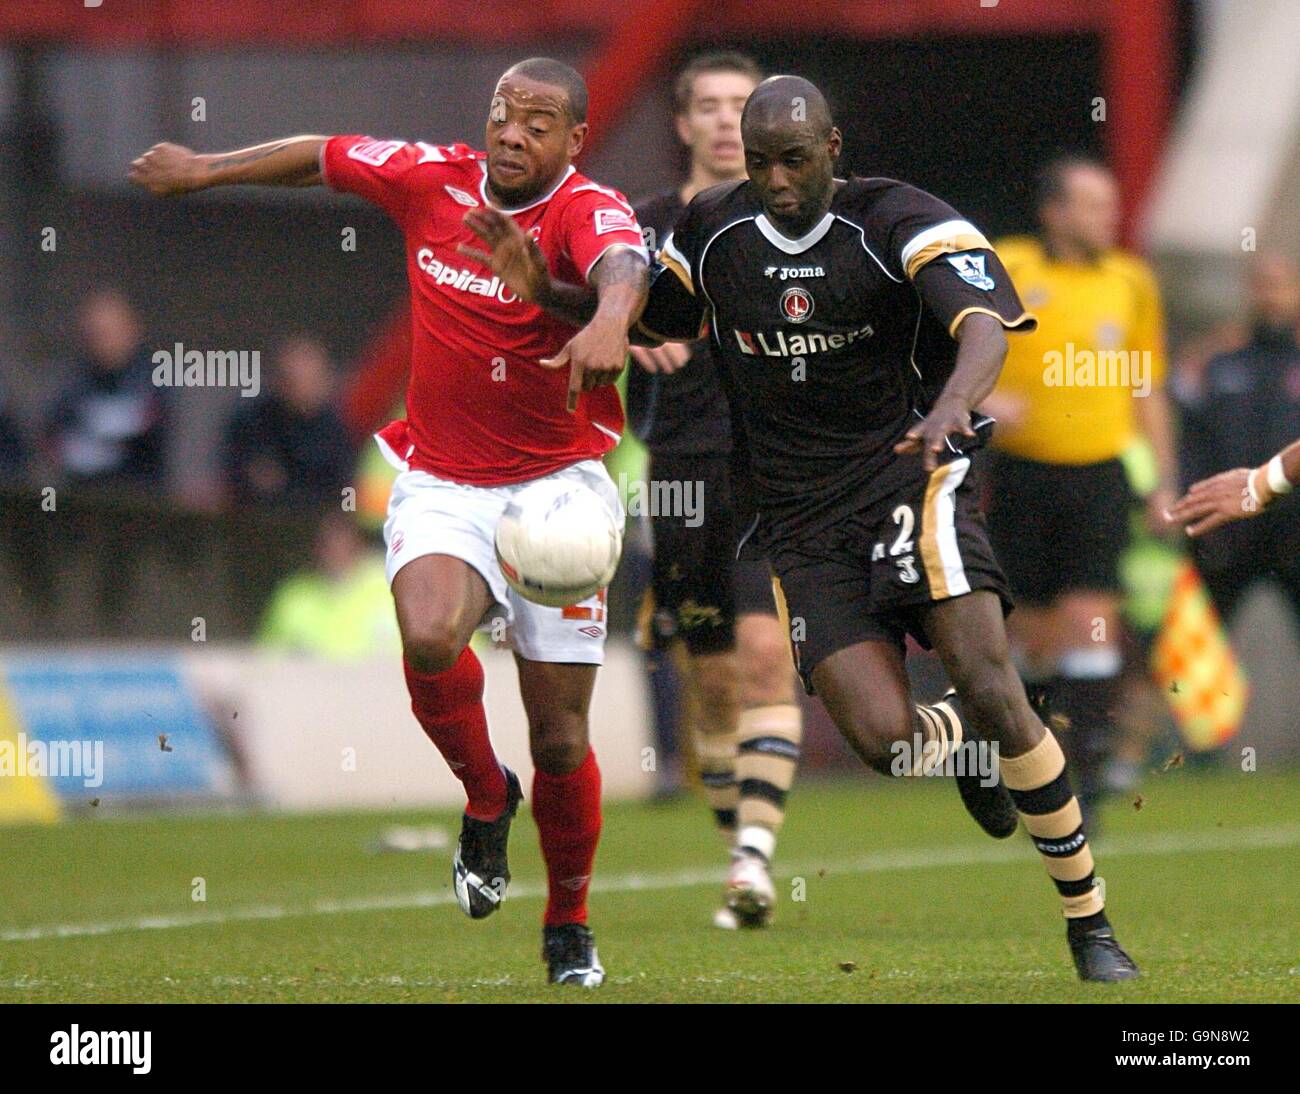 Soccer - FA Cup - Third Round - Nottingham Forest v Charlton Athletic - City Ground. Nottingham Forest's Junior Agogo and Charlton Athletic's Djimi Traore (right) Stock Photo